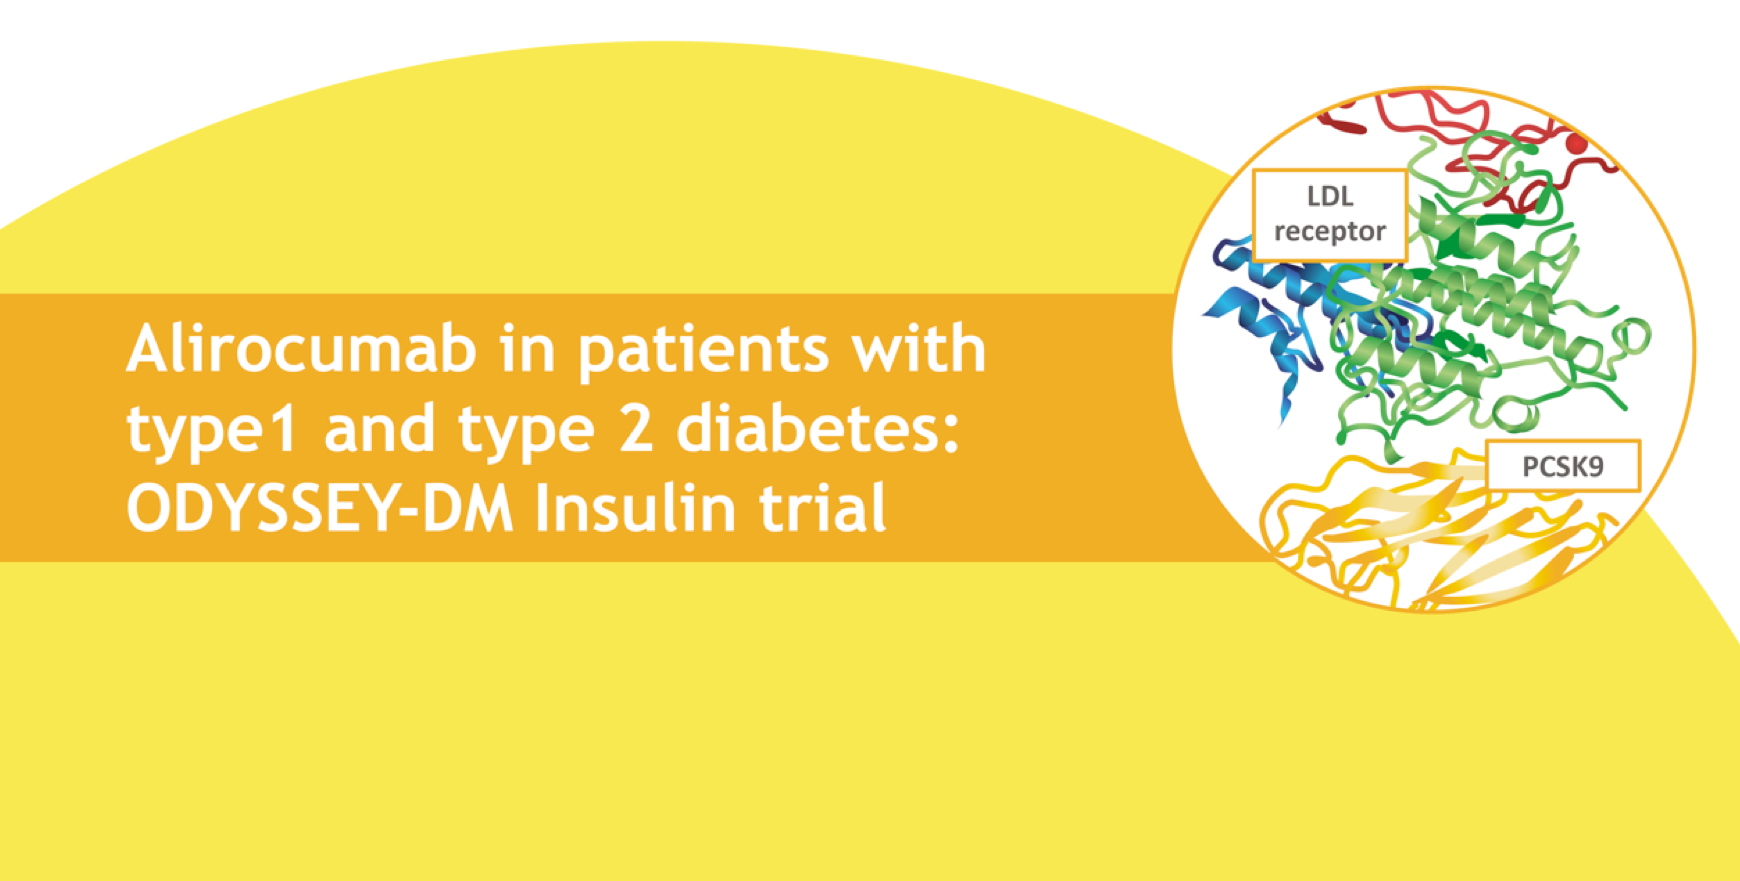 Alirocumab in patients with type 1 and type 2 diabetes: ODYSSEY-DM Insulin trial